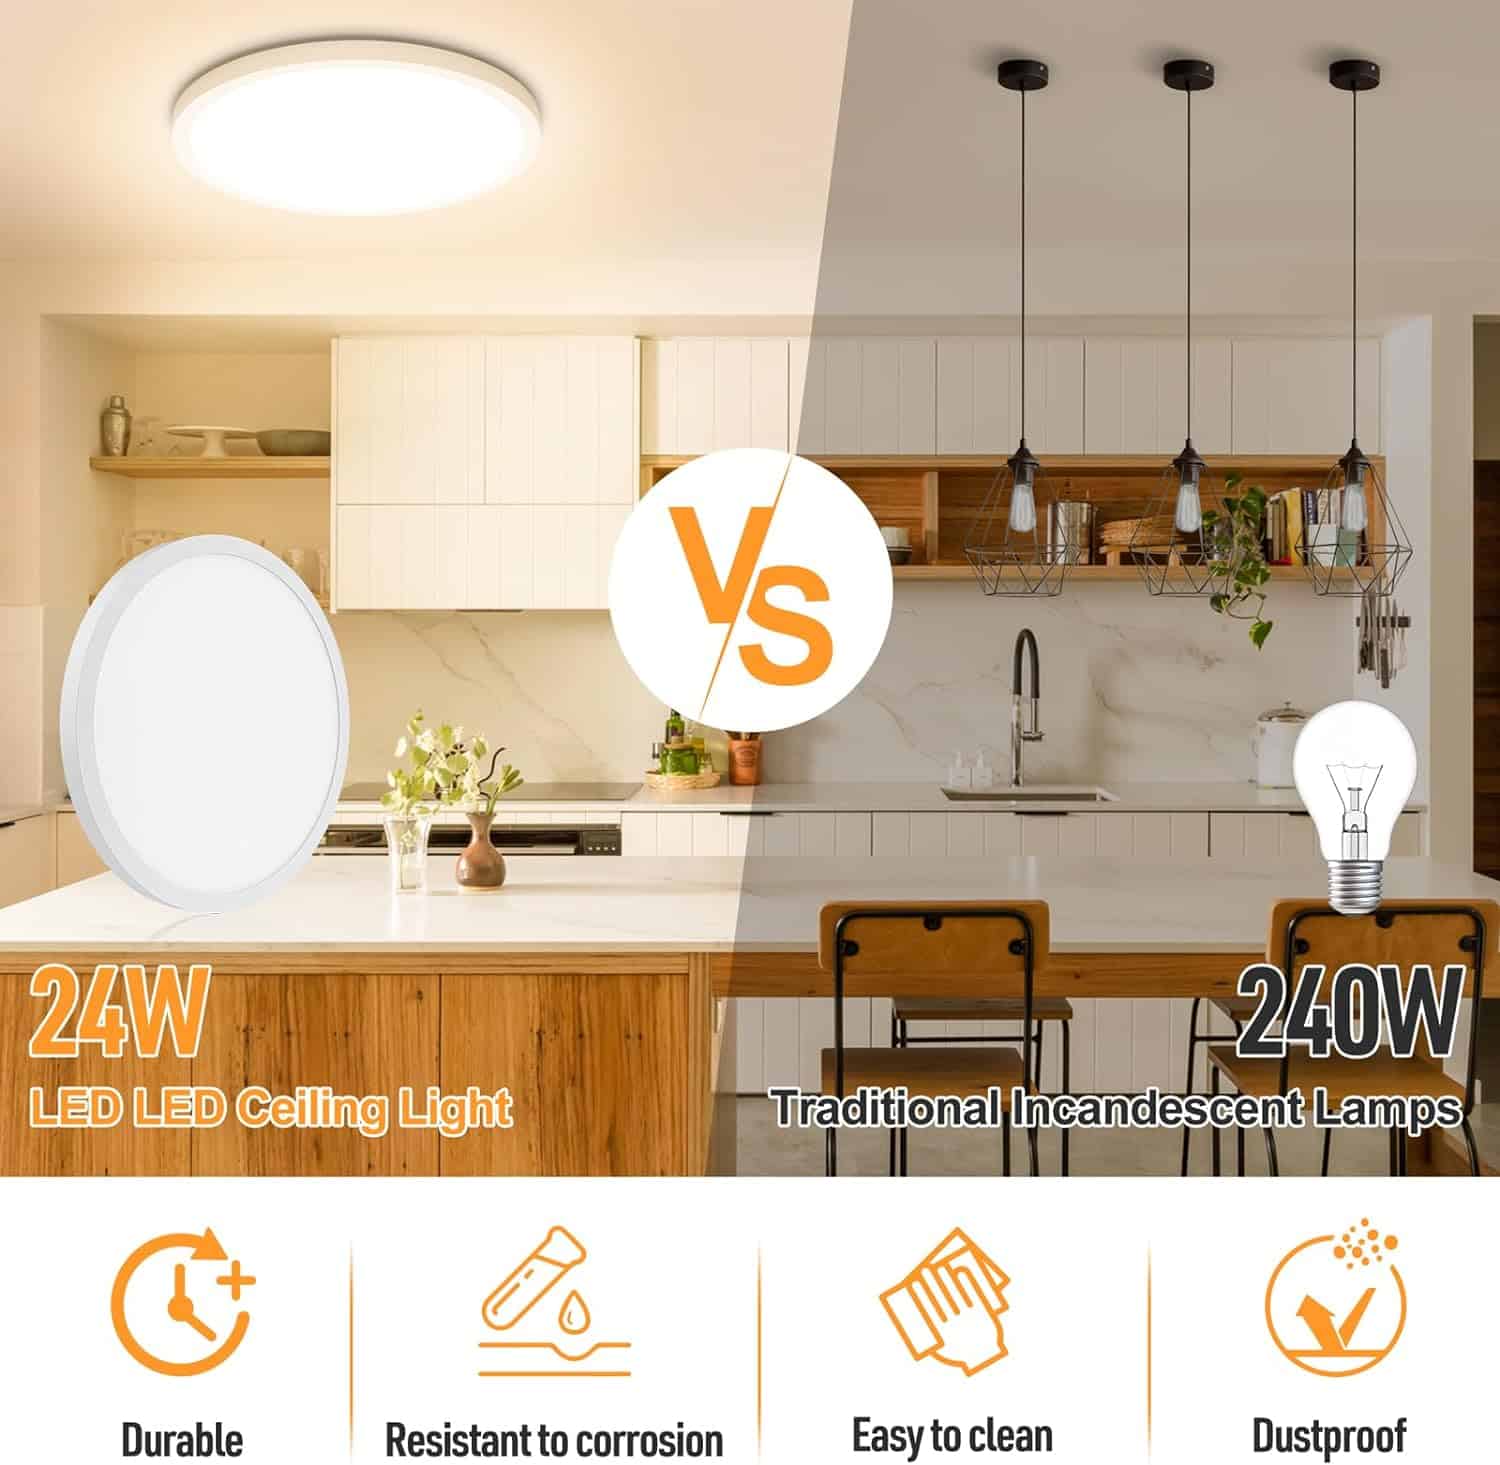 LED Flush Mount Ceiling Light Fixture, 5000K Daylight White, 2400LM, 12 Inch 24W Round Flat , 240W Equivalent Modern Panel Lamp for Bathroom Hallway Kitchen Stairwell, Non-Dimmable